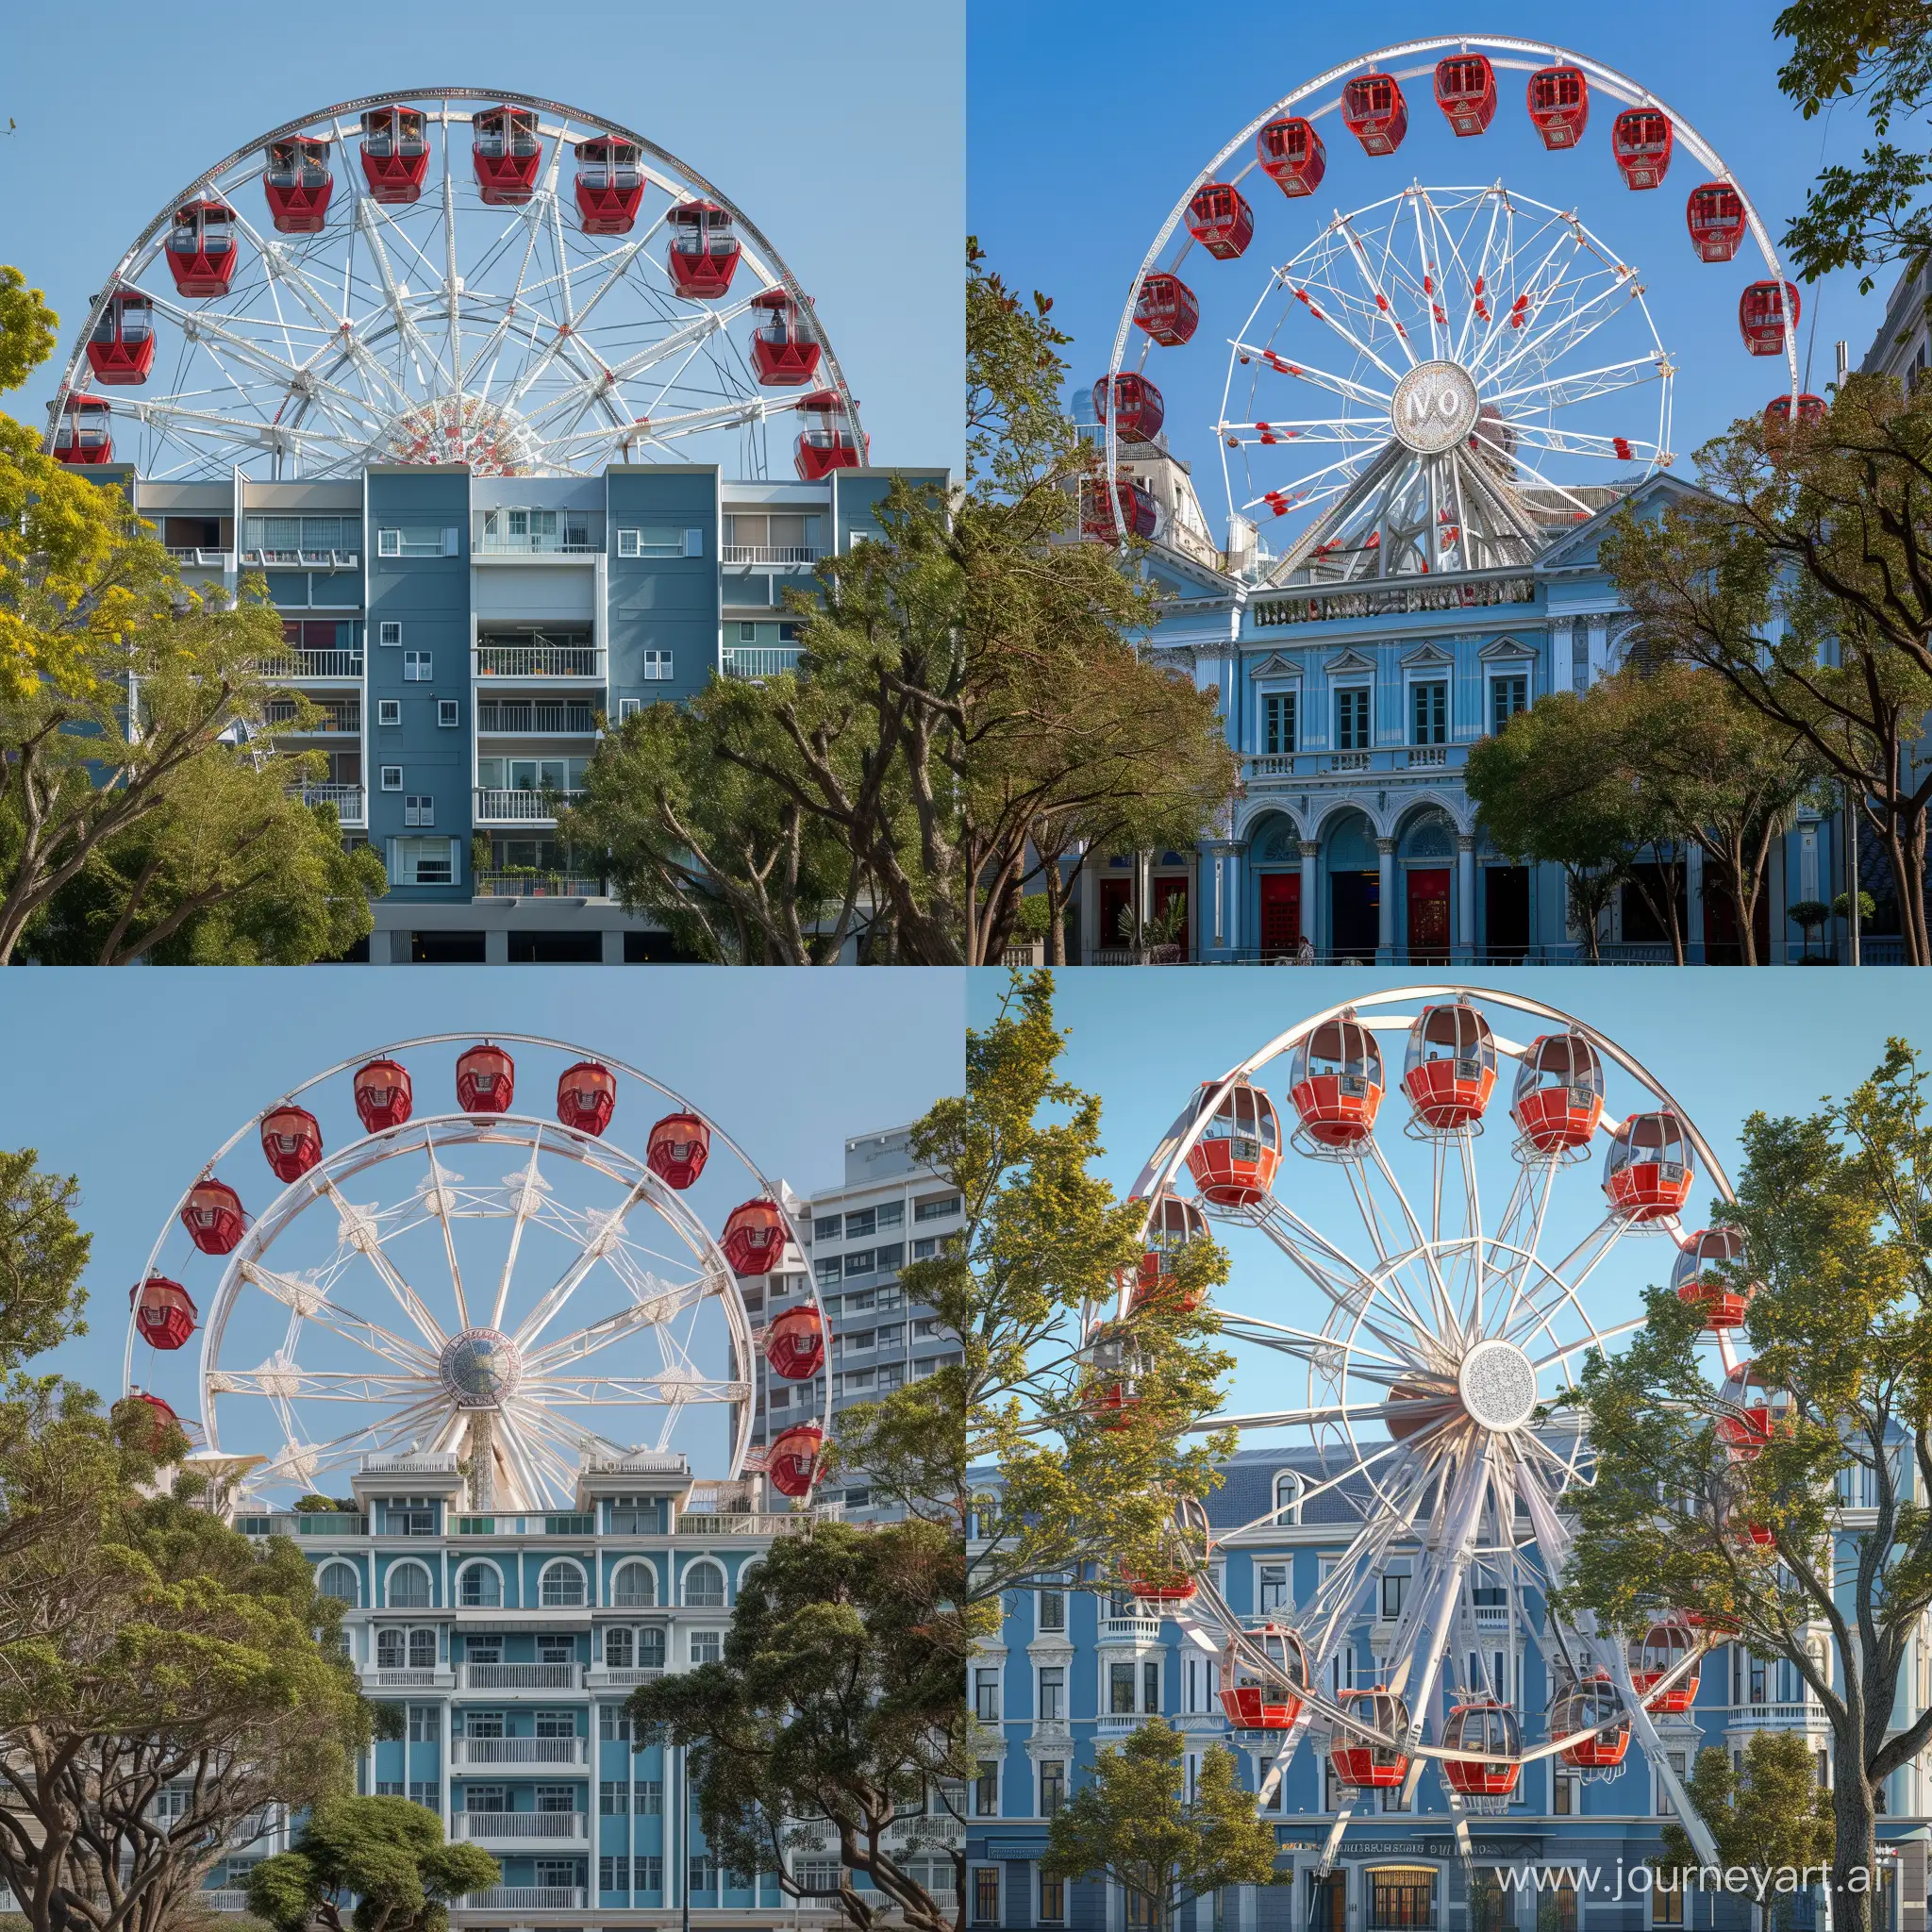 a ferris wheel with red gondolas and a white lattice structure. It is positioned in front of a multi-story building with a blue façade and white detailing. There are trees with green foliage on either side of the ferris wheel and in the foreground. The sky is a clear blue color.